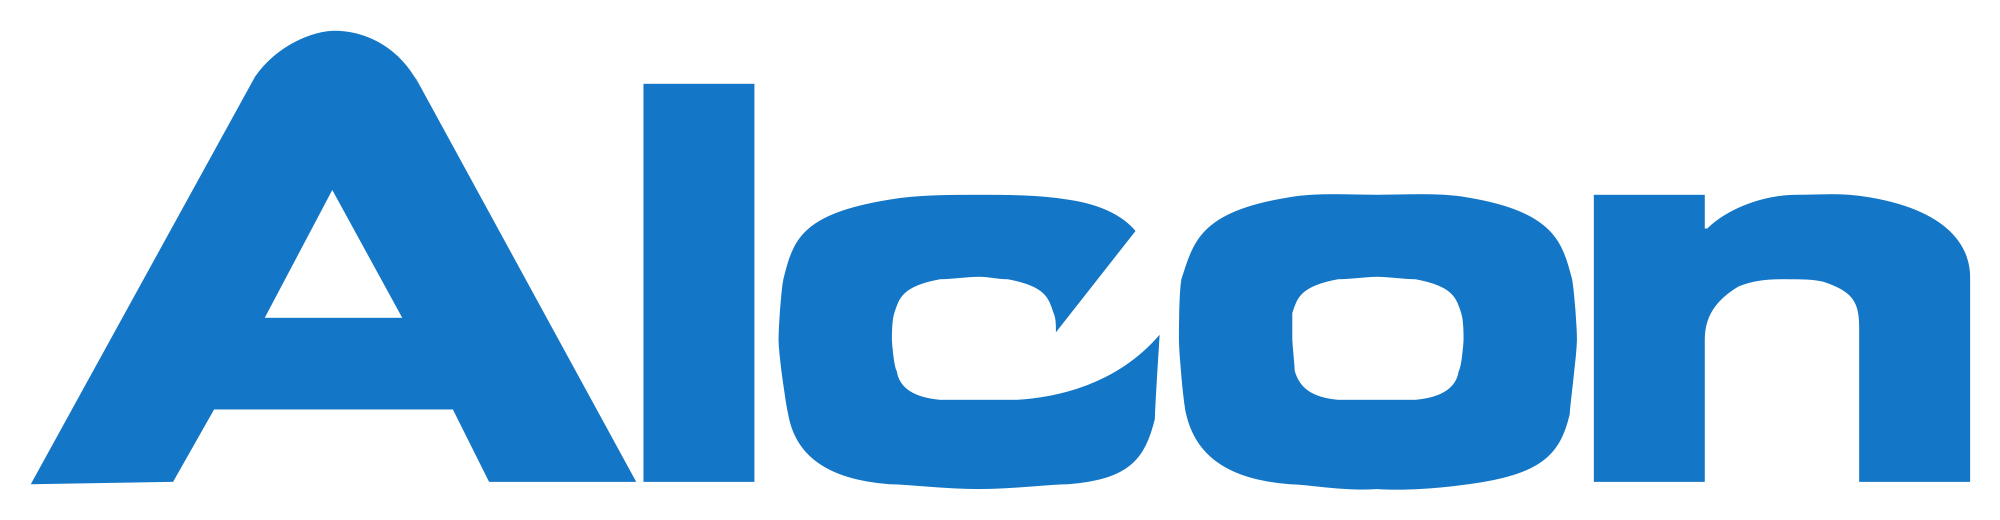 2000px-Logo_Alcon.png